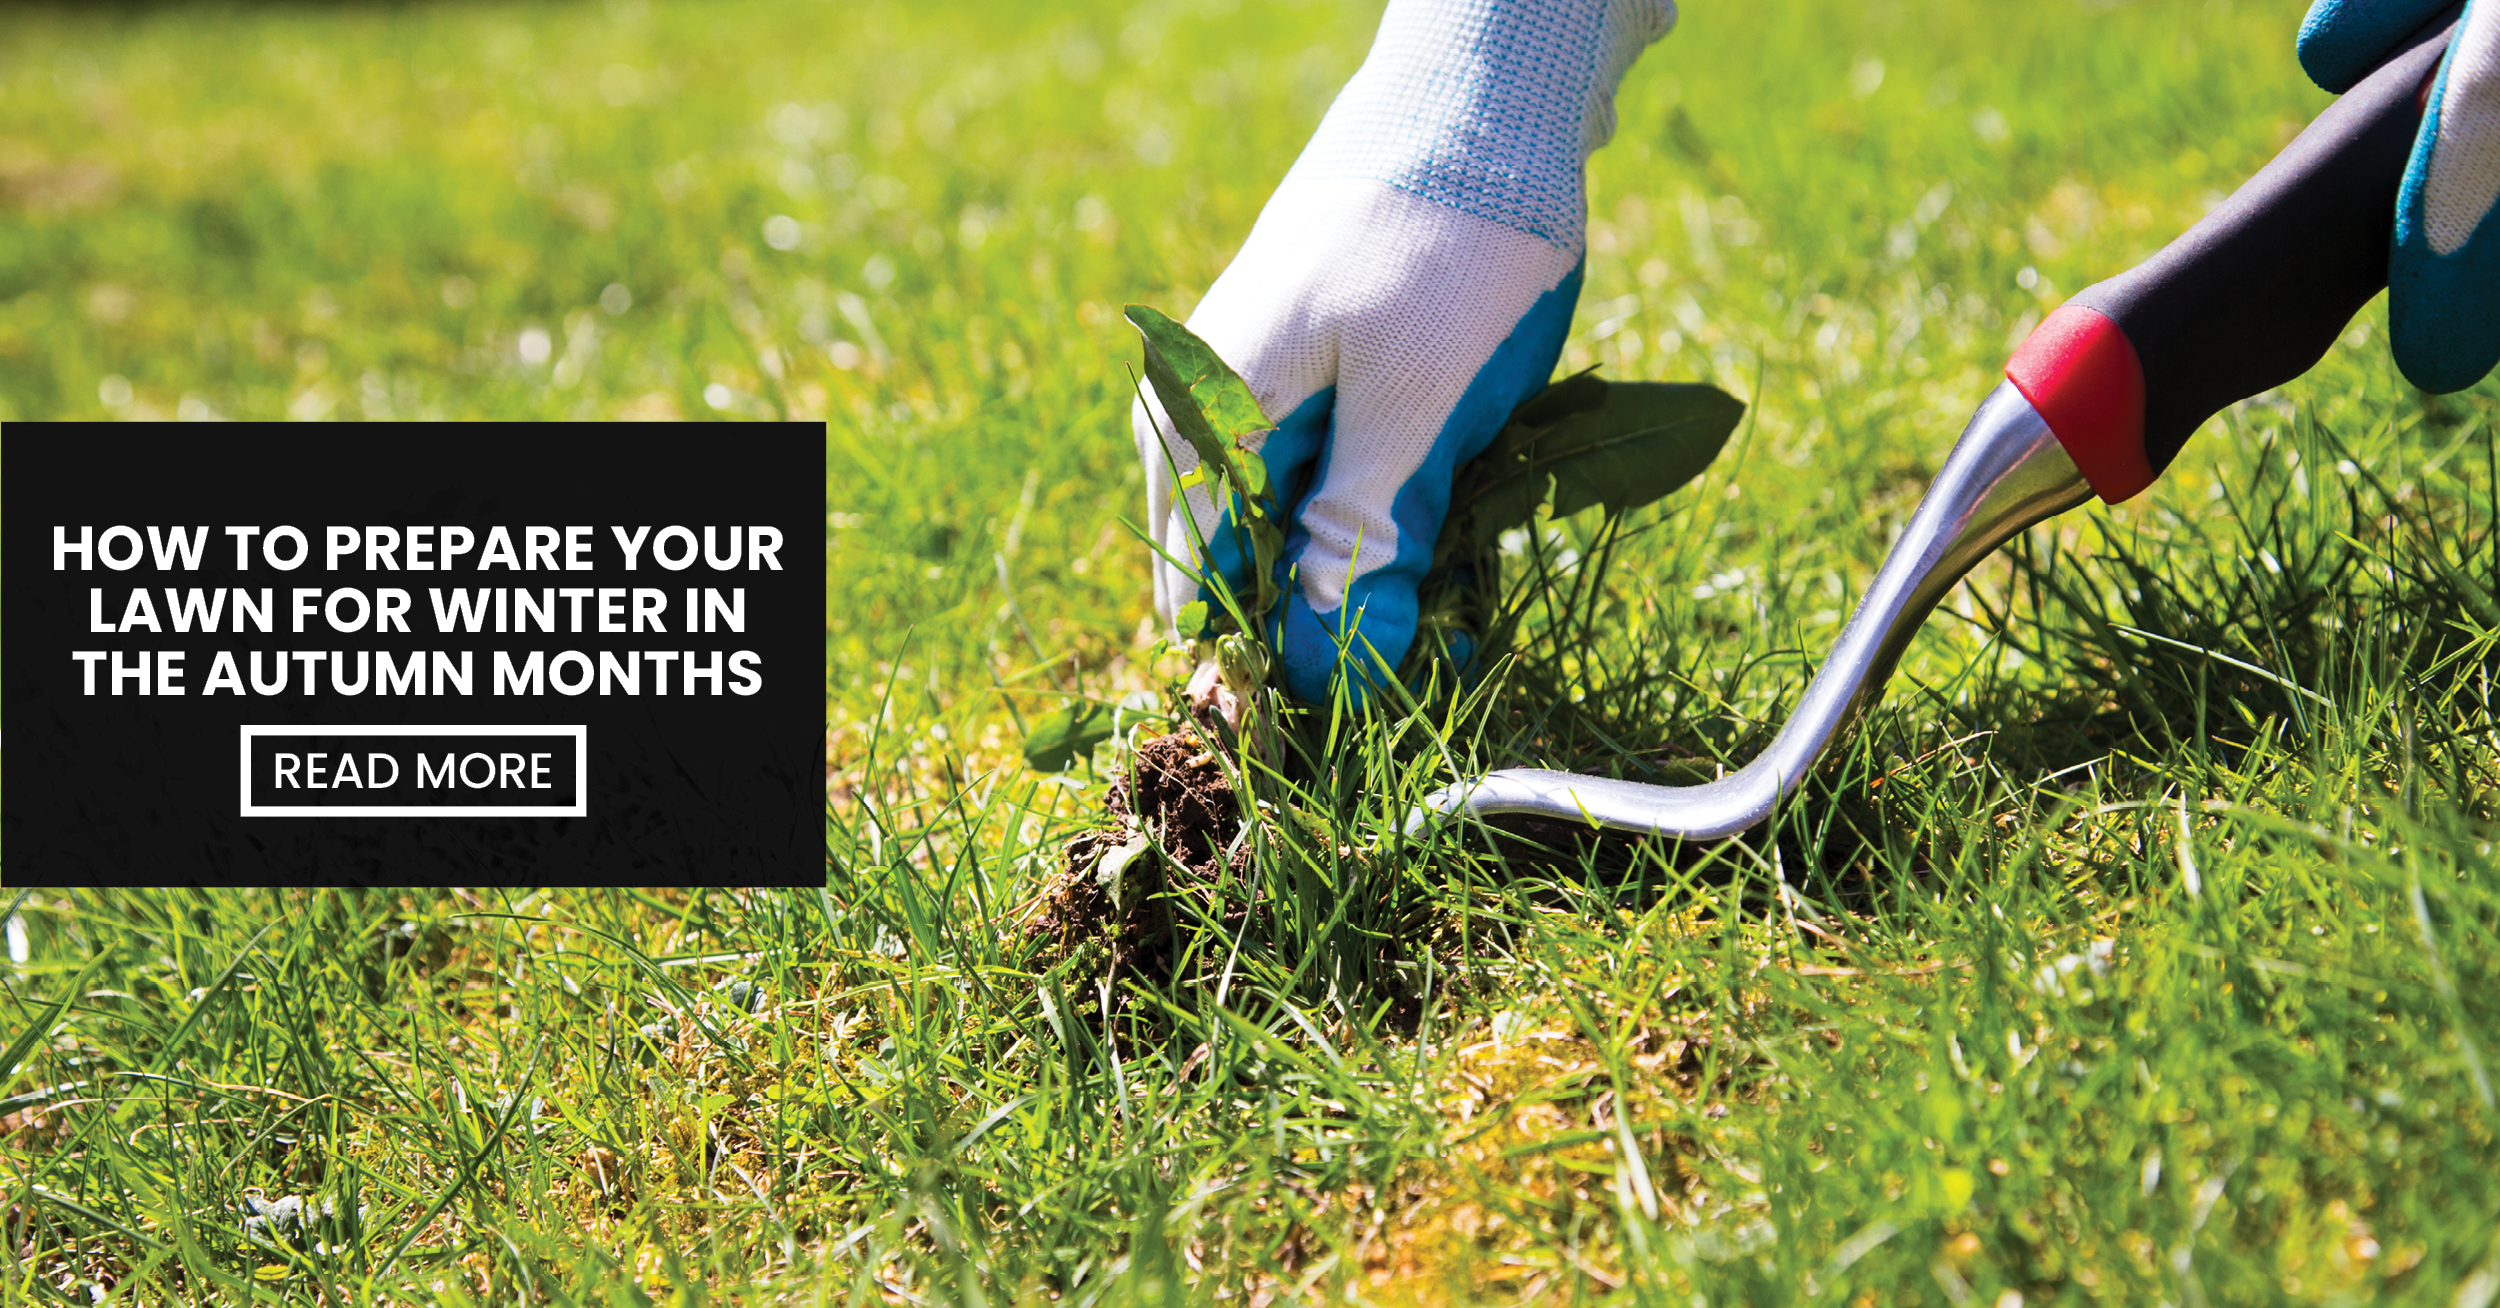 Blog - Lead Image (How To Prepare Your Lawn For Winter In The Autumn Months) WEB-VERSION